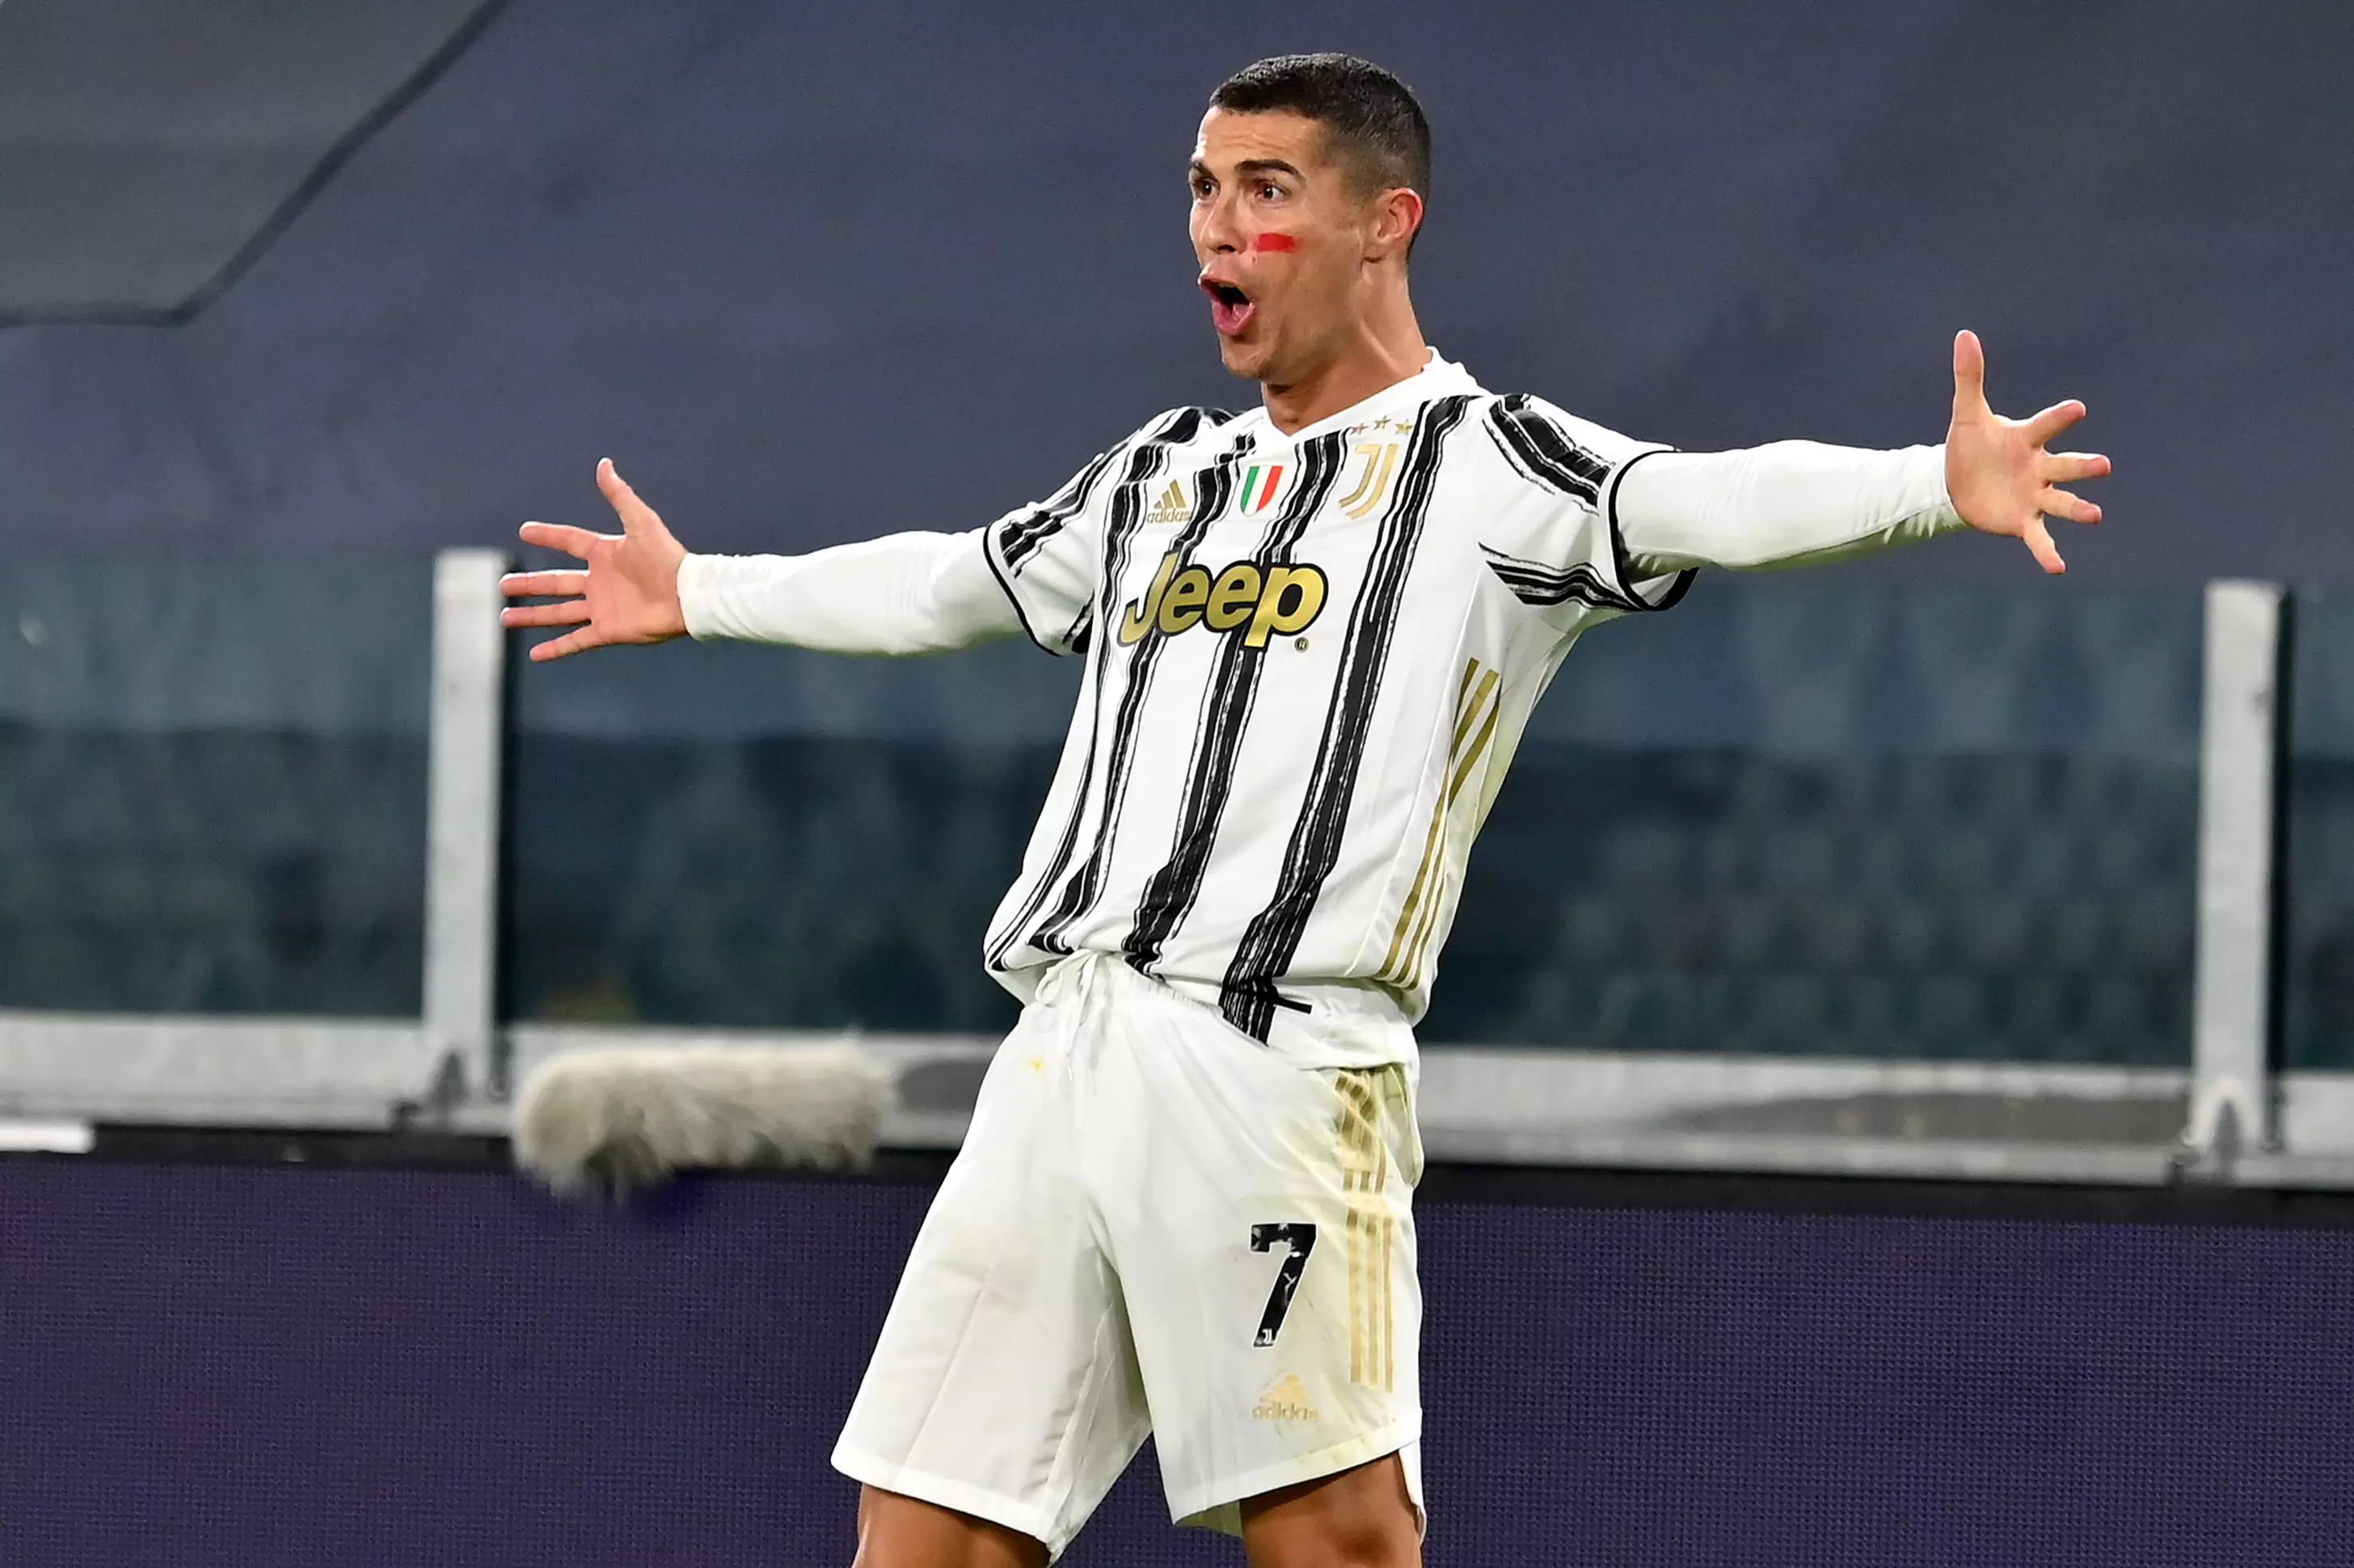 Ronaldo has been formidable since joining Juve.